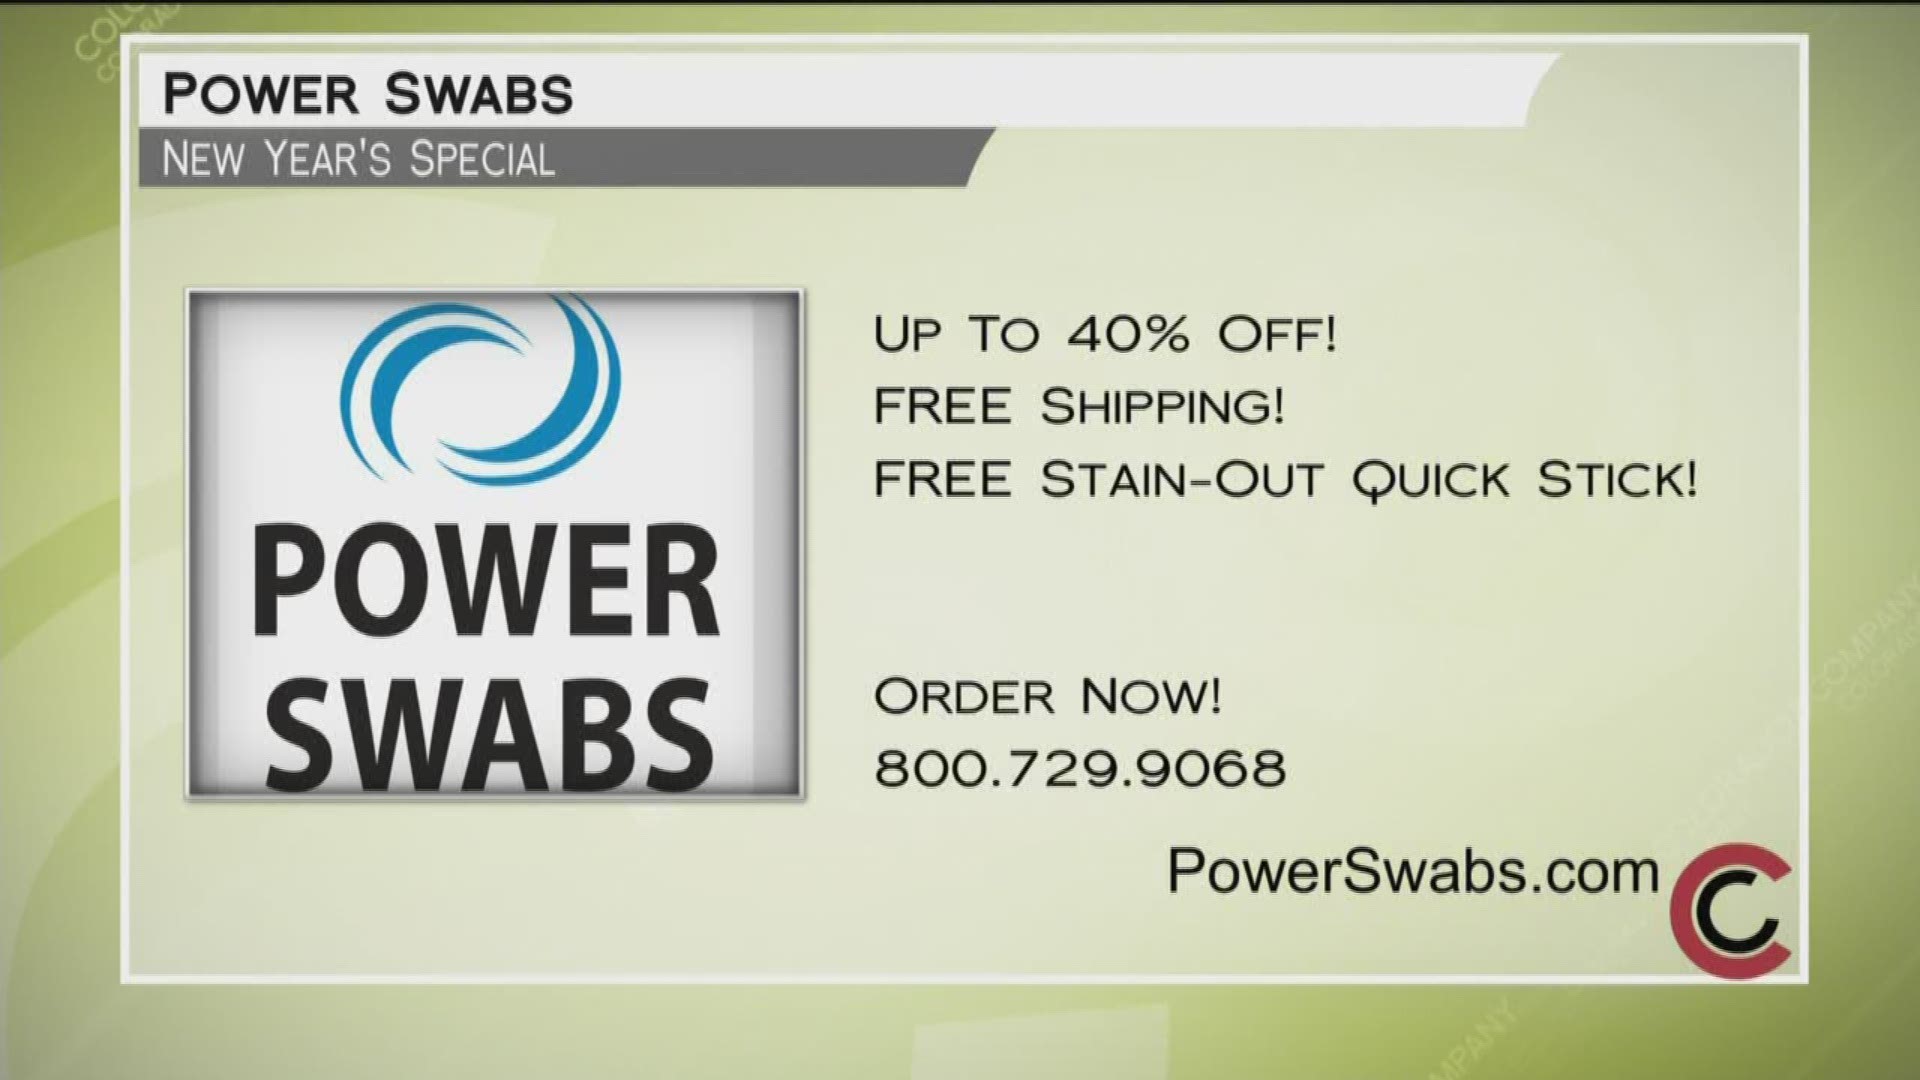 Call 800.729.9068 or visit PowerSwabs.com to order yours and get a whiter, brighter smile today. You'll get 40% off AND free shipping!